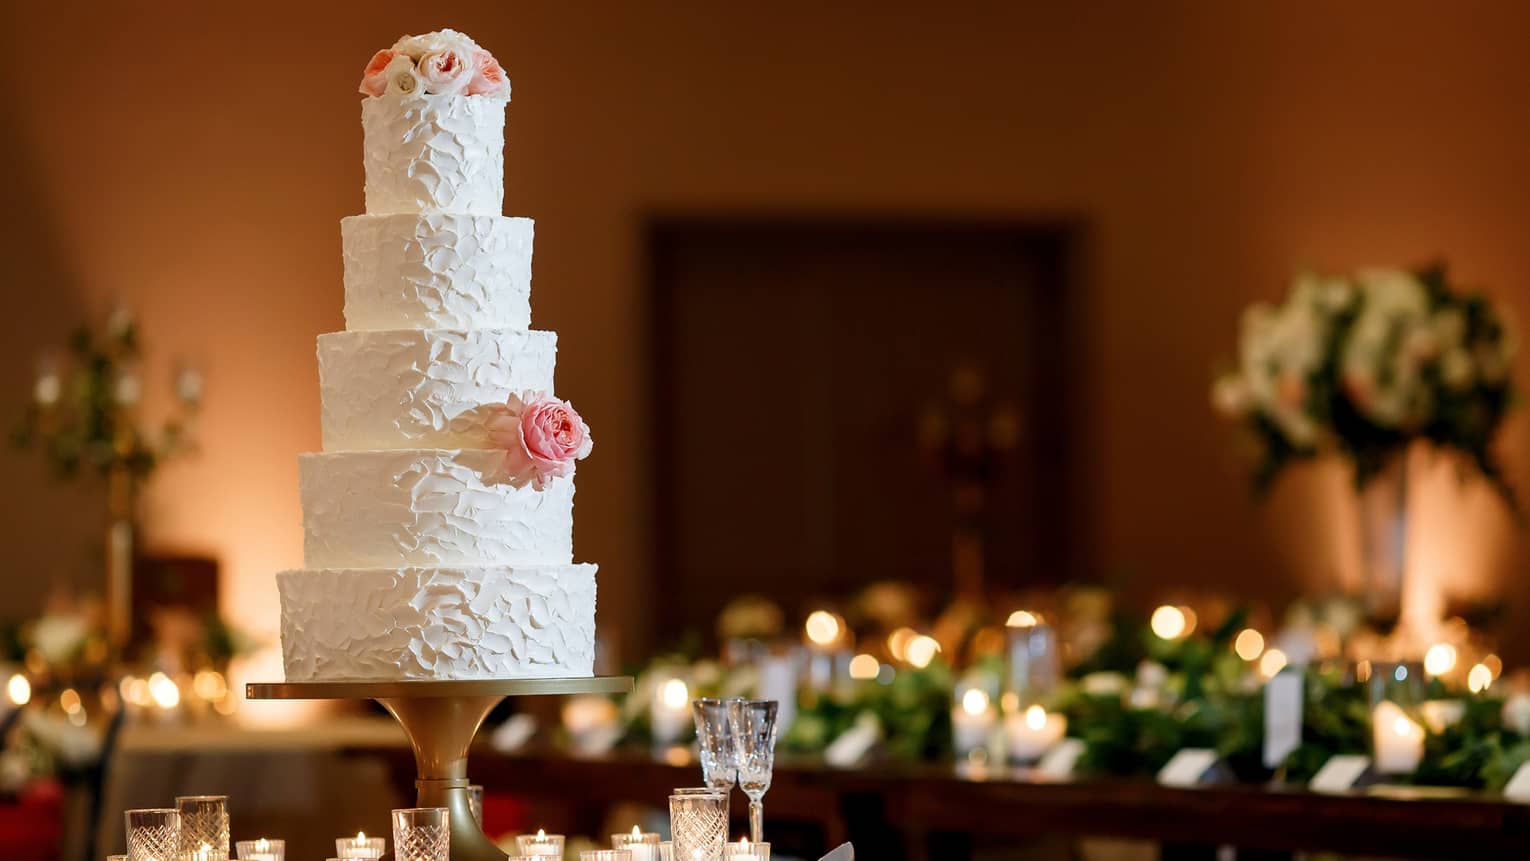 A five-tiered white wedding cake garnished with a white rose and some small white and pink flowers on the top tier , sits on a white round table surrounded by white candles